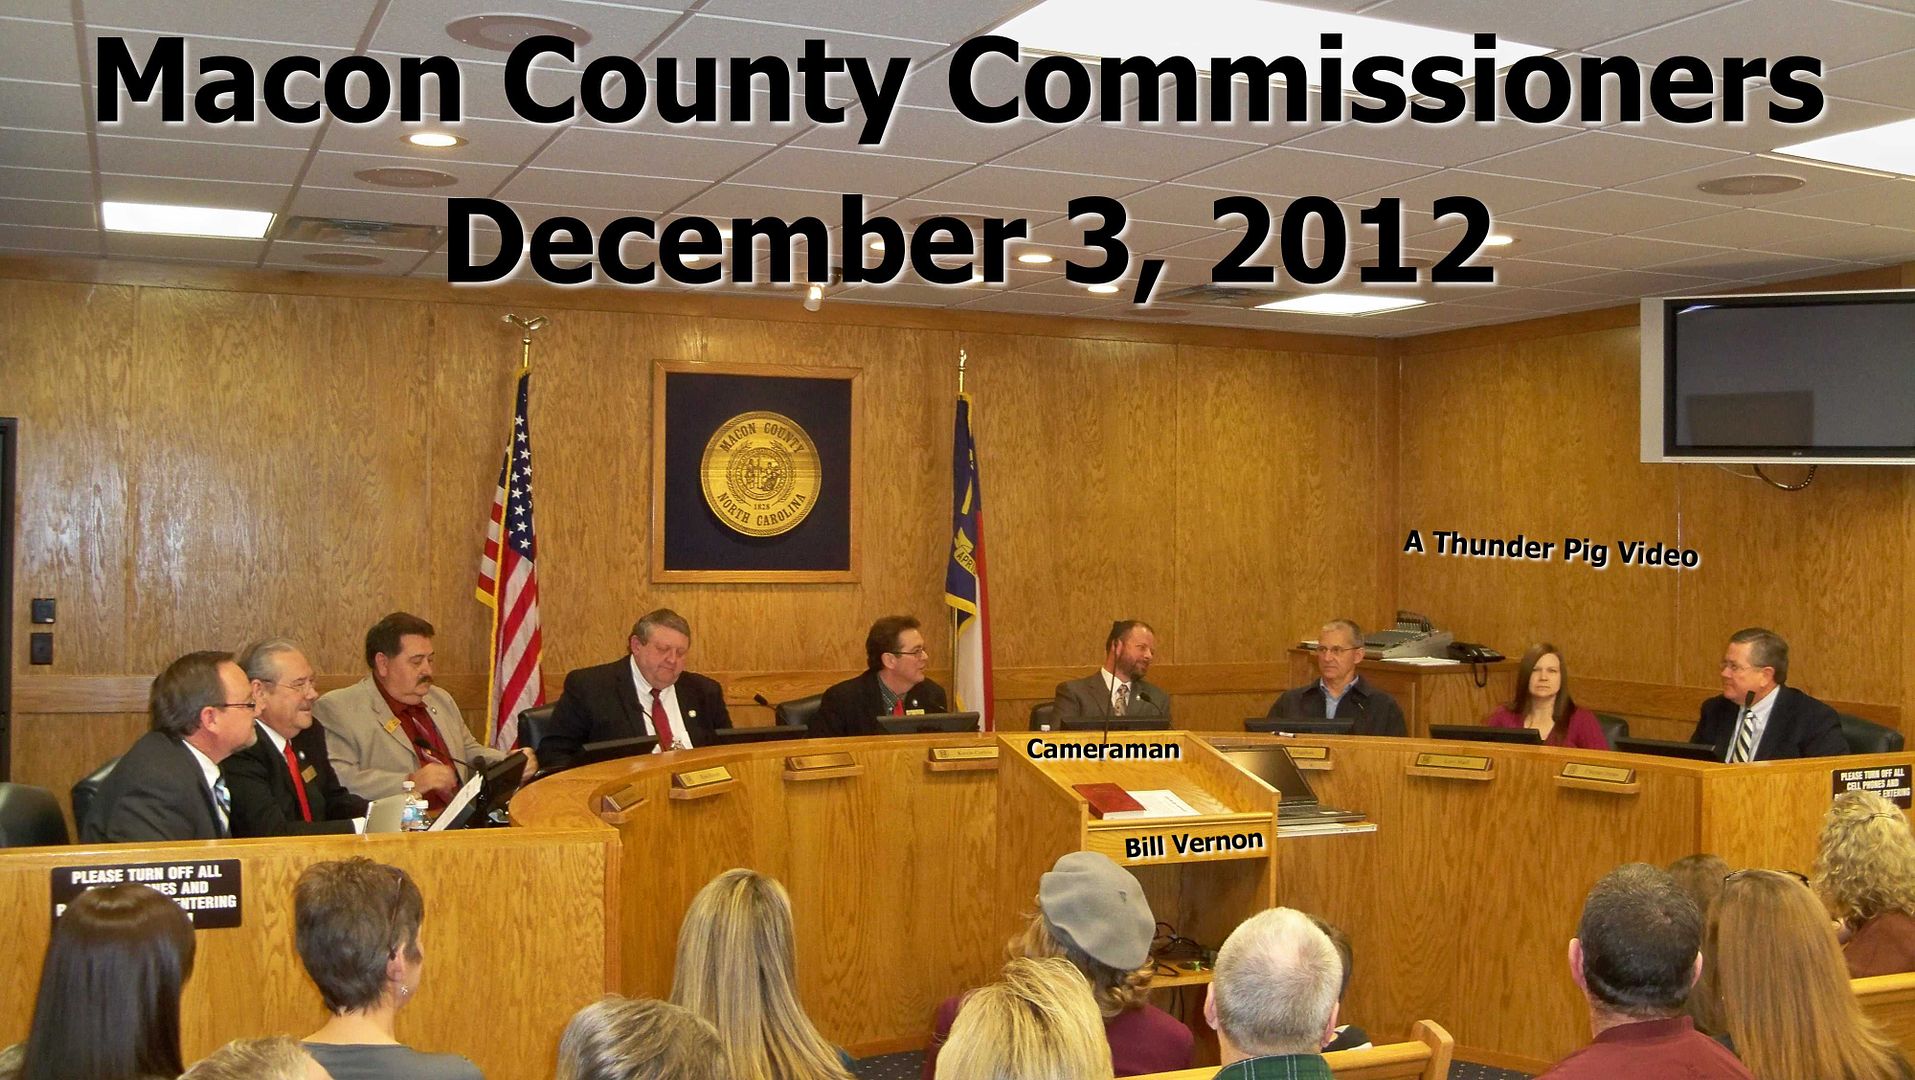 The Macon County Commissioners